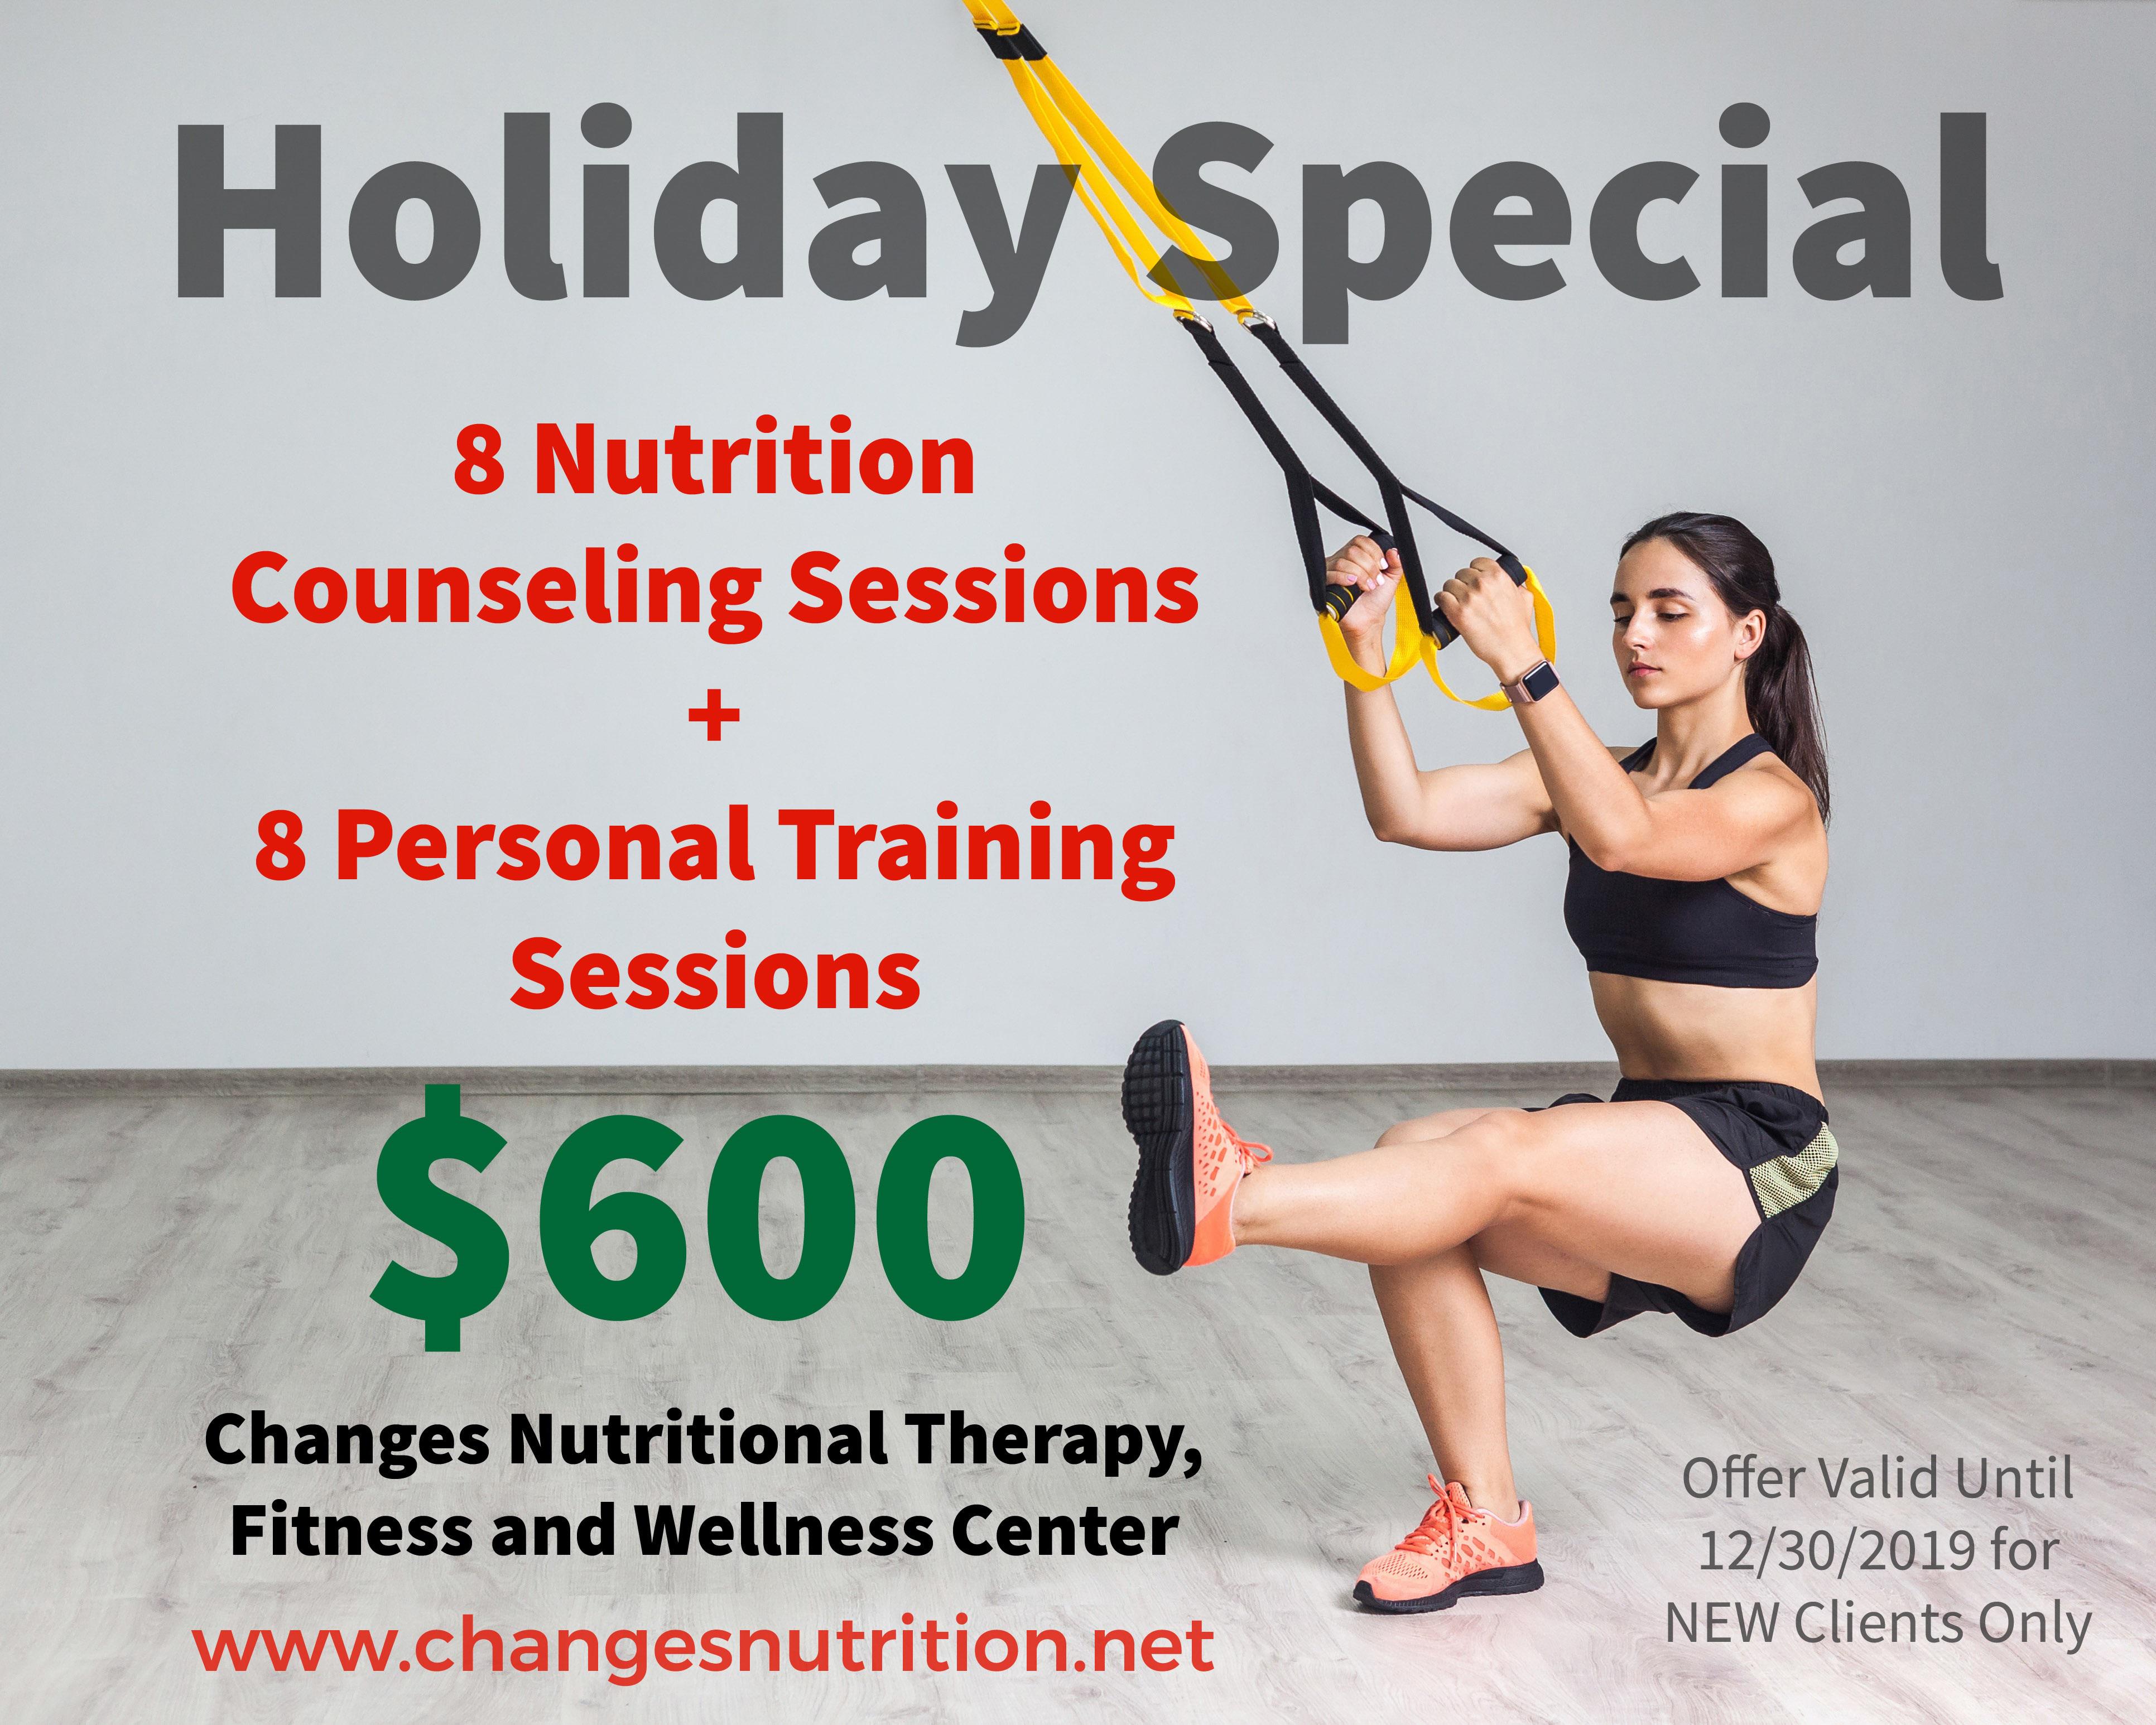 Changes Nutritional Therapy, Fitness and Wellness Center Photo